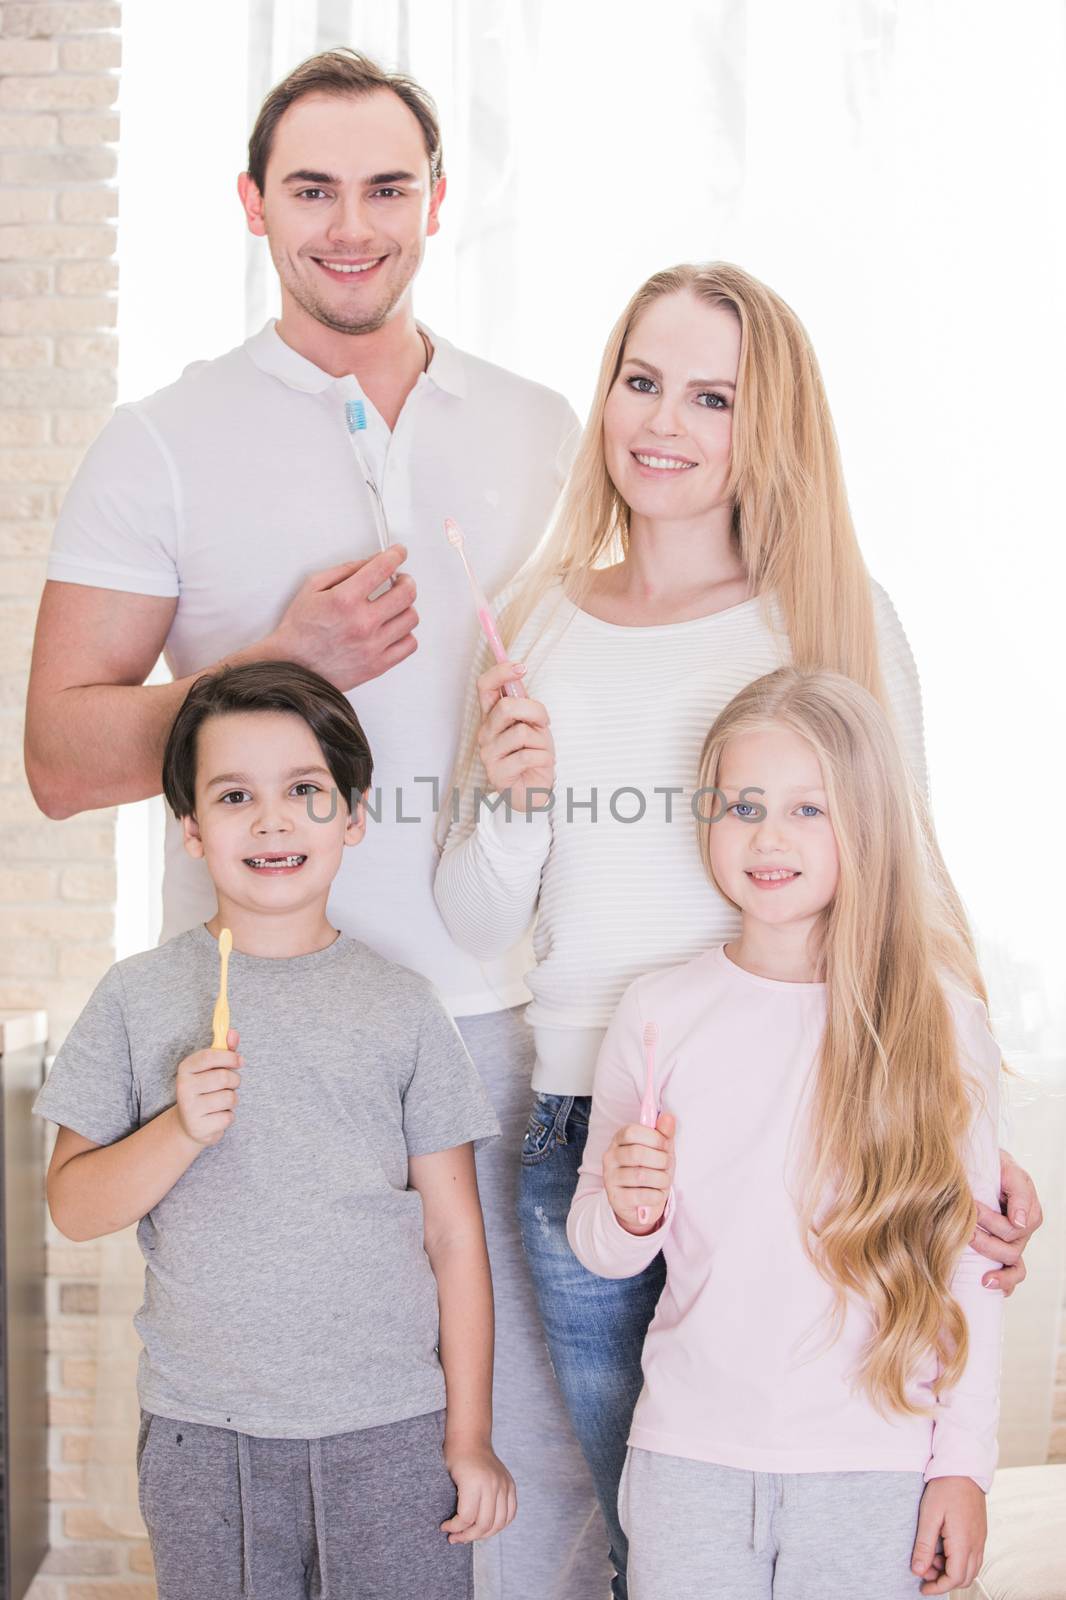 Happy family of four people with toothbrushes